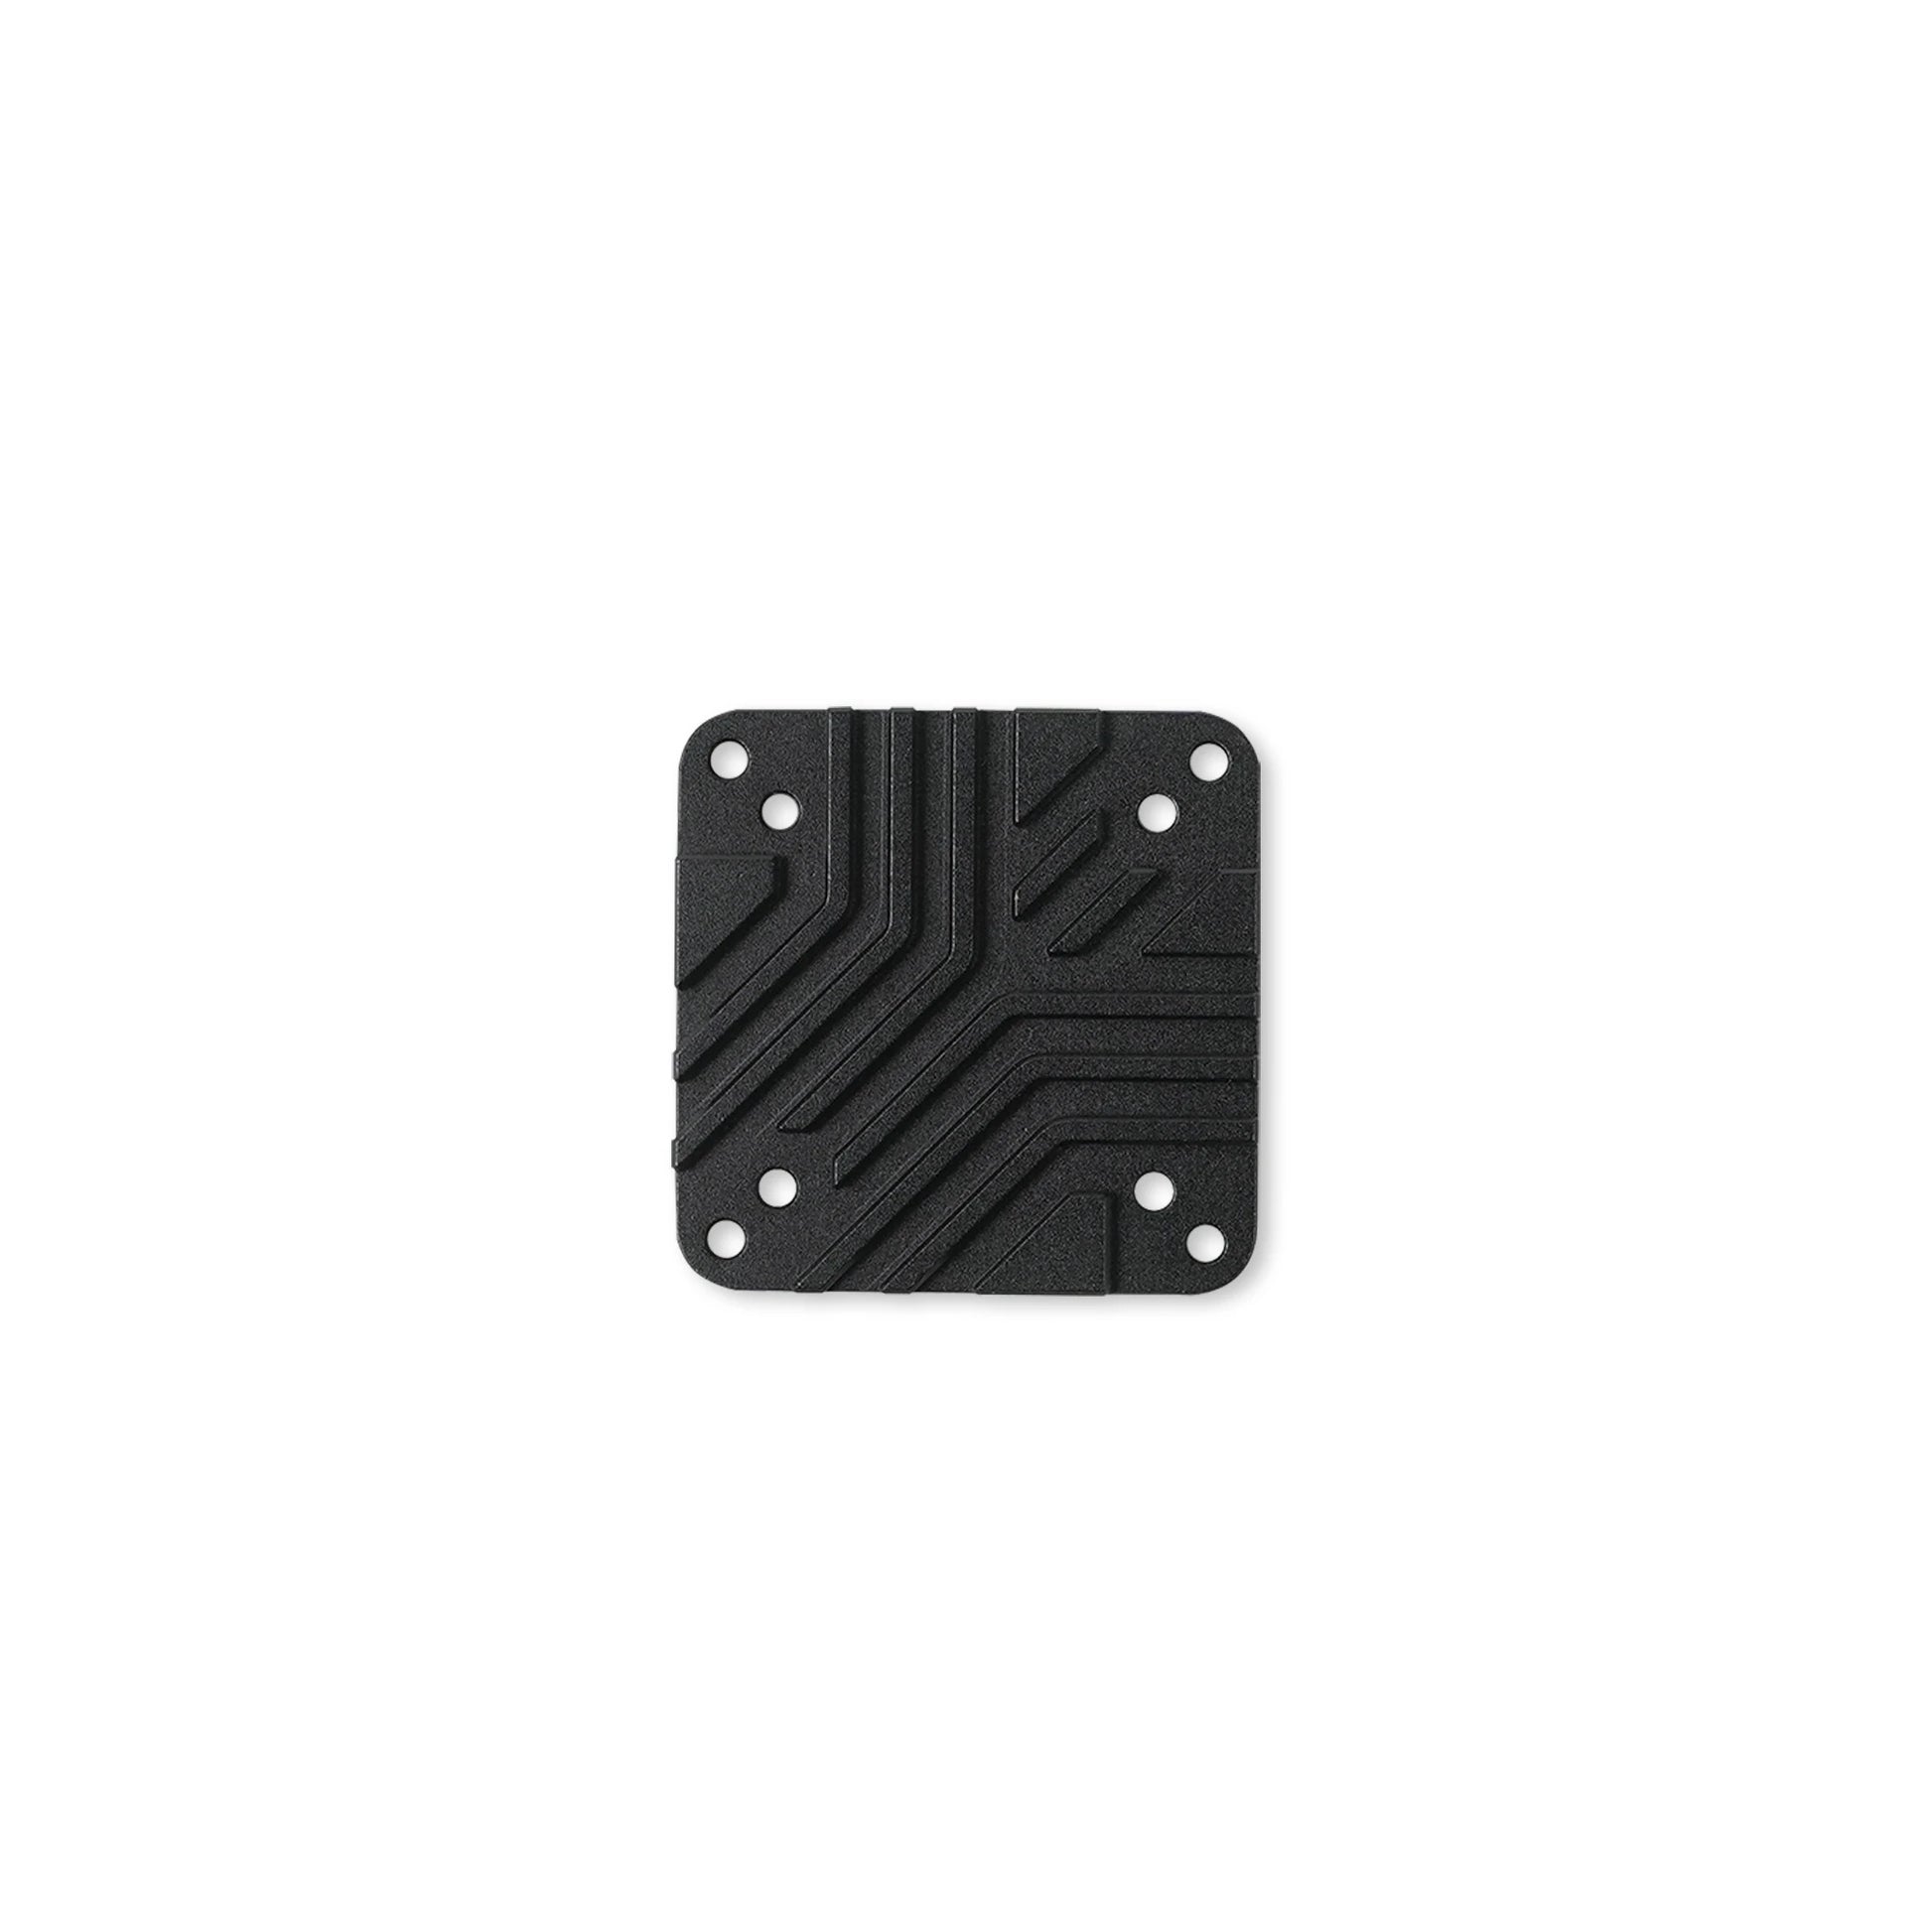 GEPRC GEP-CT25 Frame Parts - Suitable Cinebot25 Drone Replacement Repair Part RC DIY FPV Freestyle Rack Accessories Spare Parts